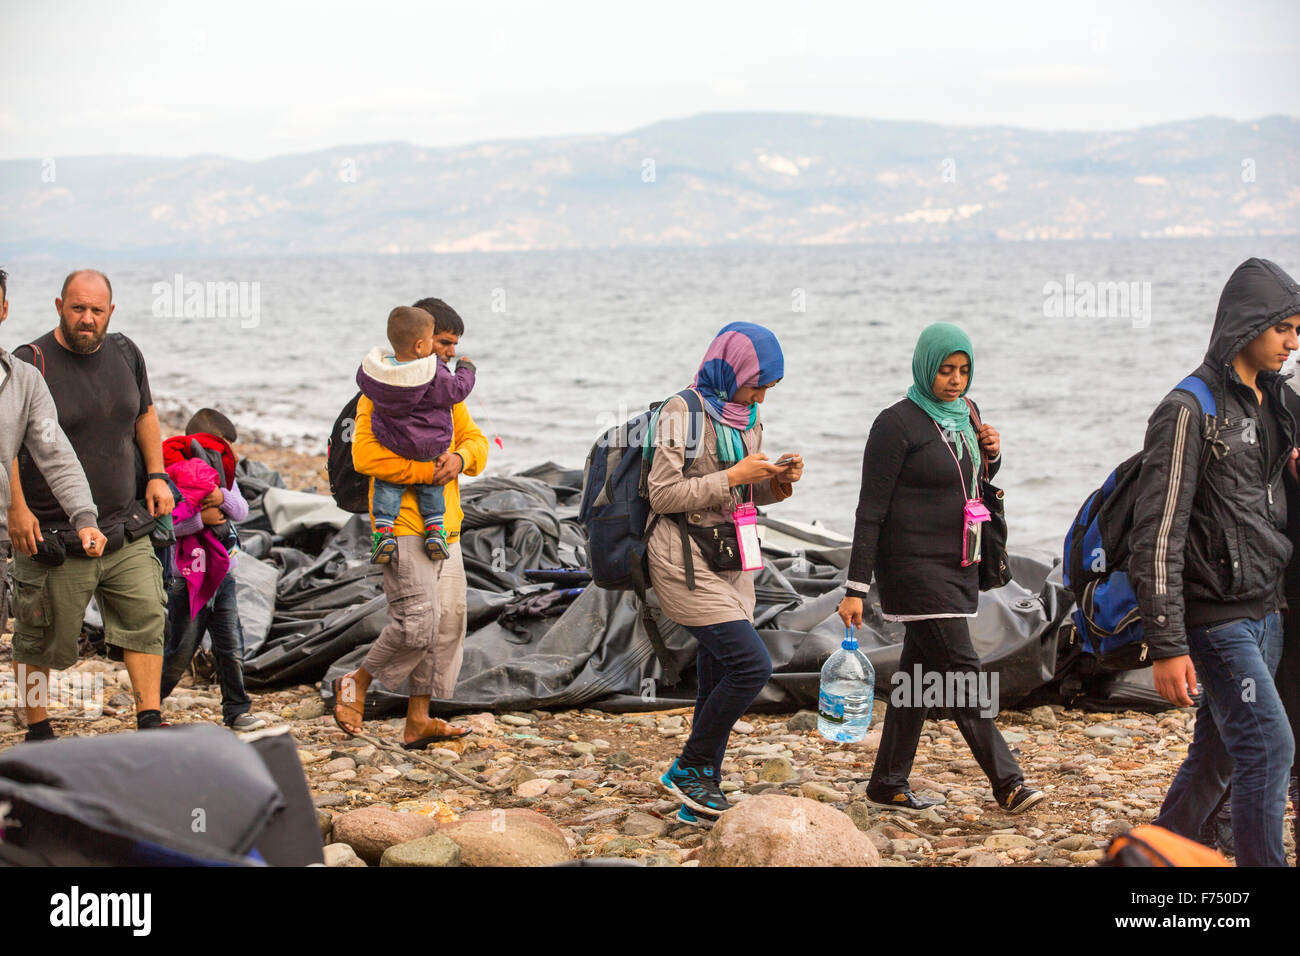 Syrian migrants fleeing the war and escaping to Europe, landing on the Greek island of Lesvos on the north coast at Efthalou. Up to 4,000 migrants a day are landing on the island and overwhelming the authorities. They are traficked by illegal Turkish people traffickers who charge up to $2,000 per person for a half hour ride in an overcrowded inflateable boat from the Turkish mainland to Lesvos. Stock Photo